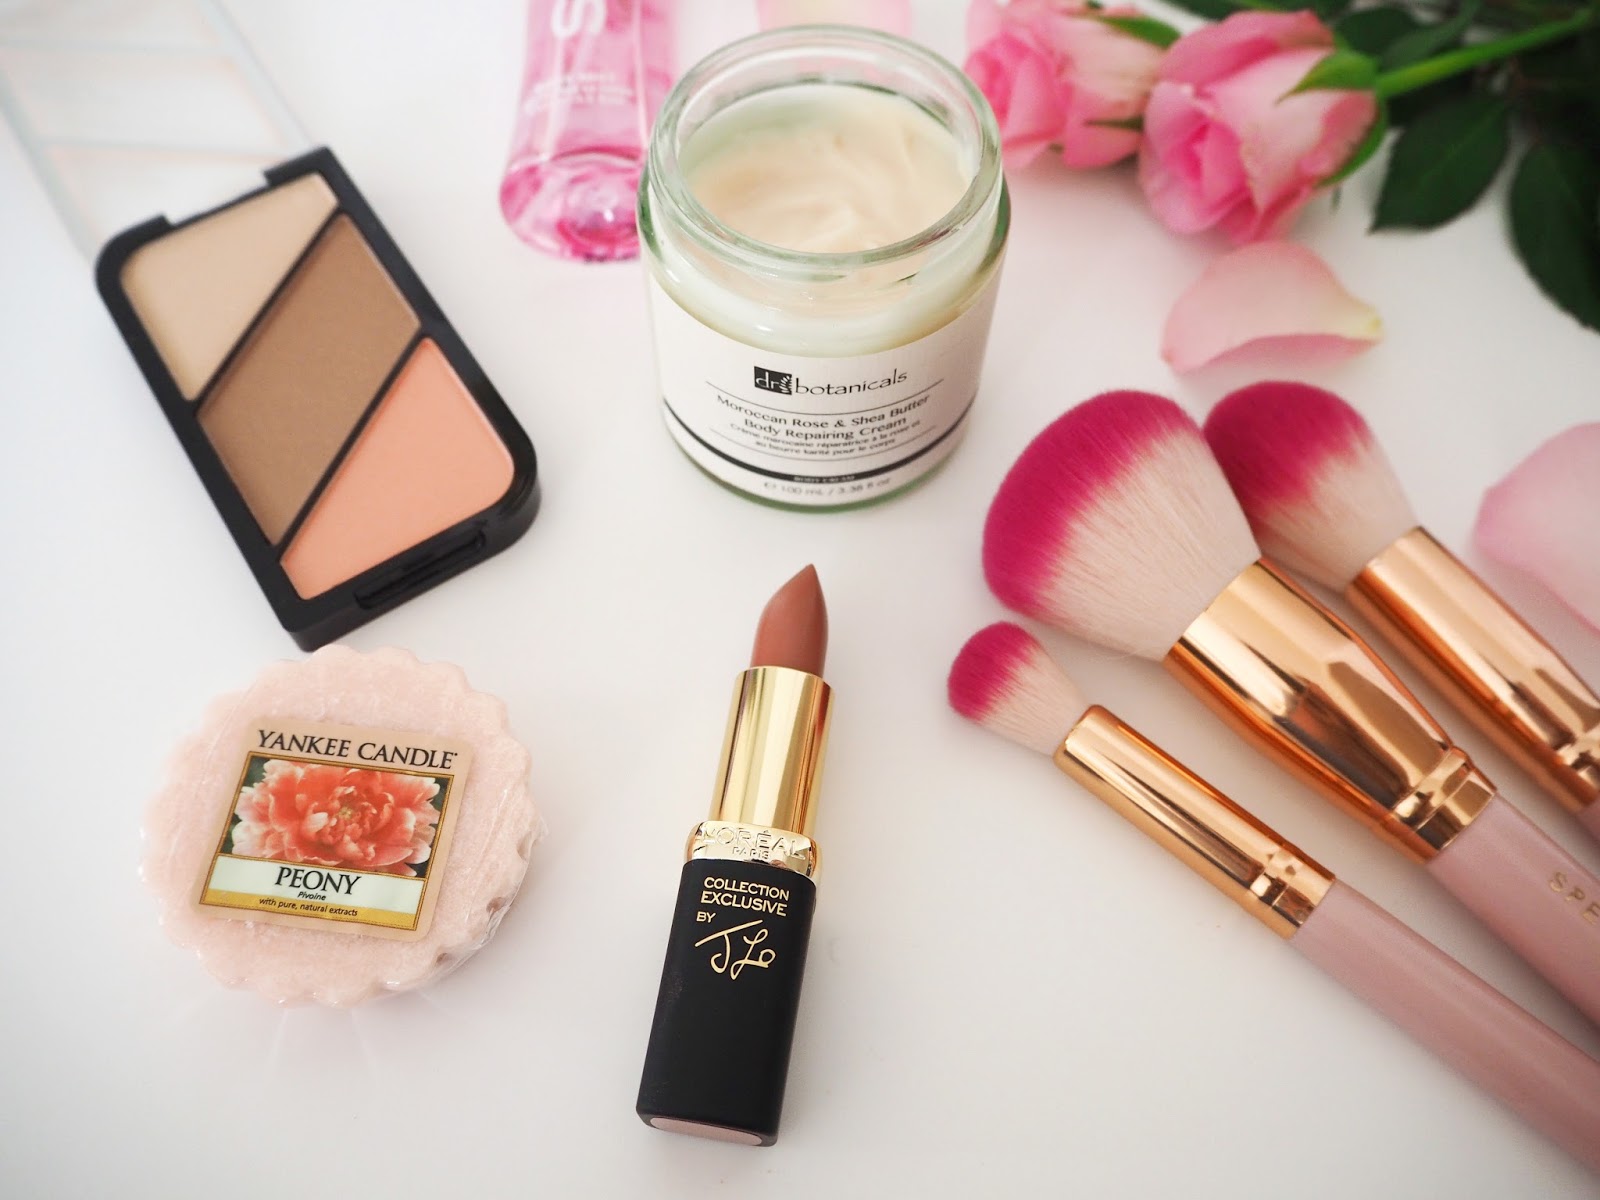 Loves List: February, Katie Kirk Loves, UK Blogger, Beauty Blogger, Make Up Blogger, Beauty Review, Skincare Blogger, Rimmel London, Yankee Candle, Spectrum Collections Brushes, Loreal Make Up, Dr Botanicals, So Fragrance, Pink Products, Pink Make Up